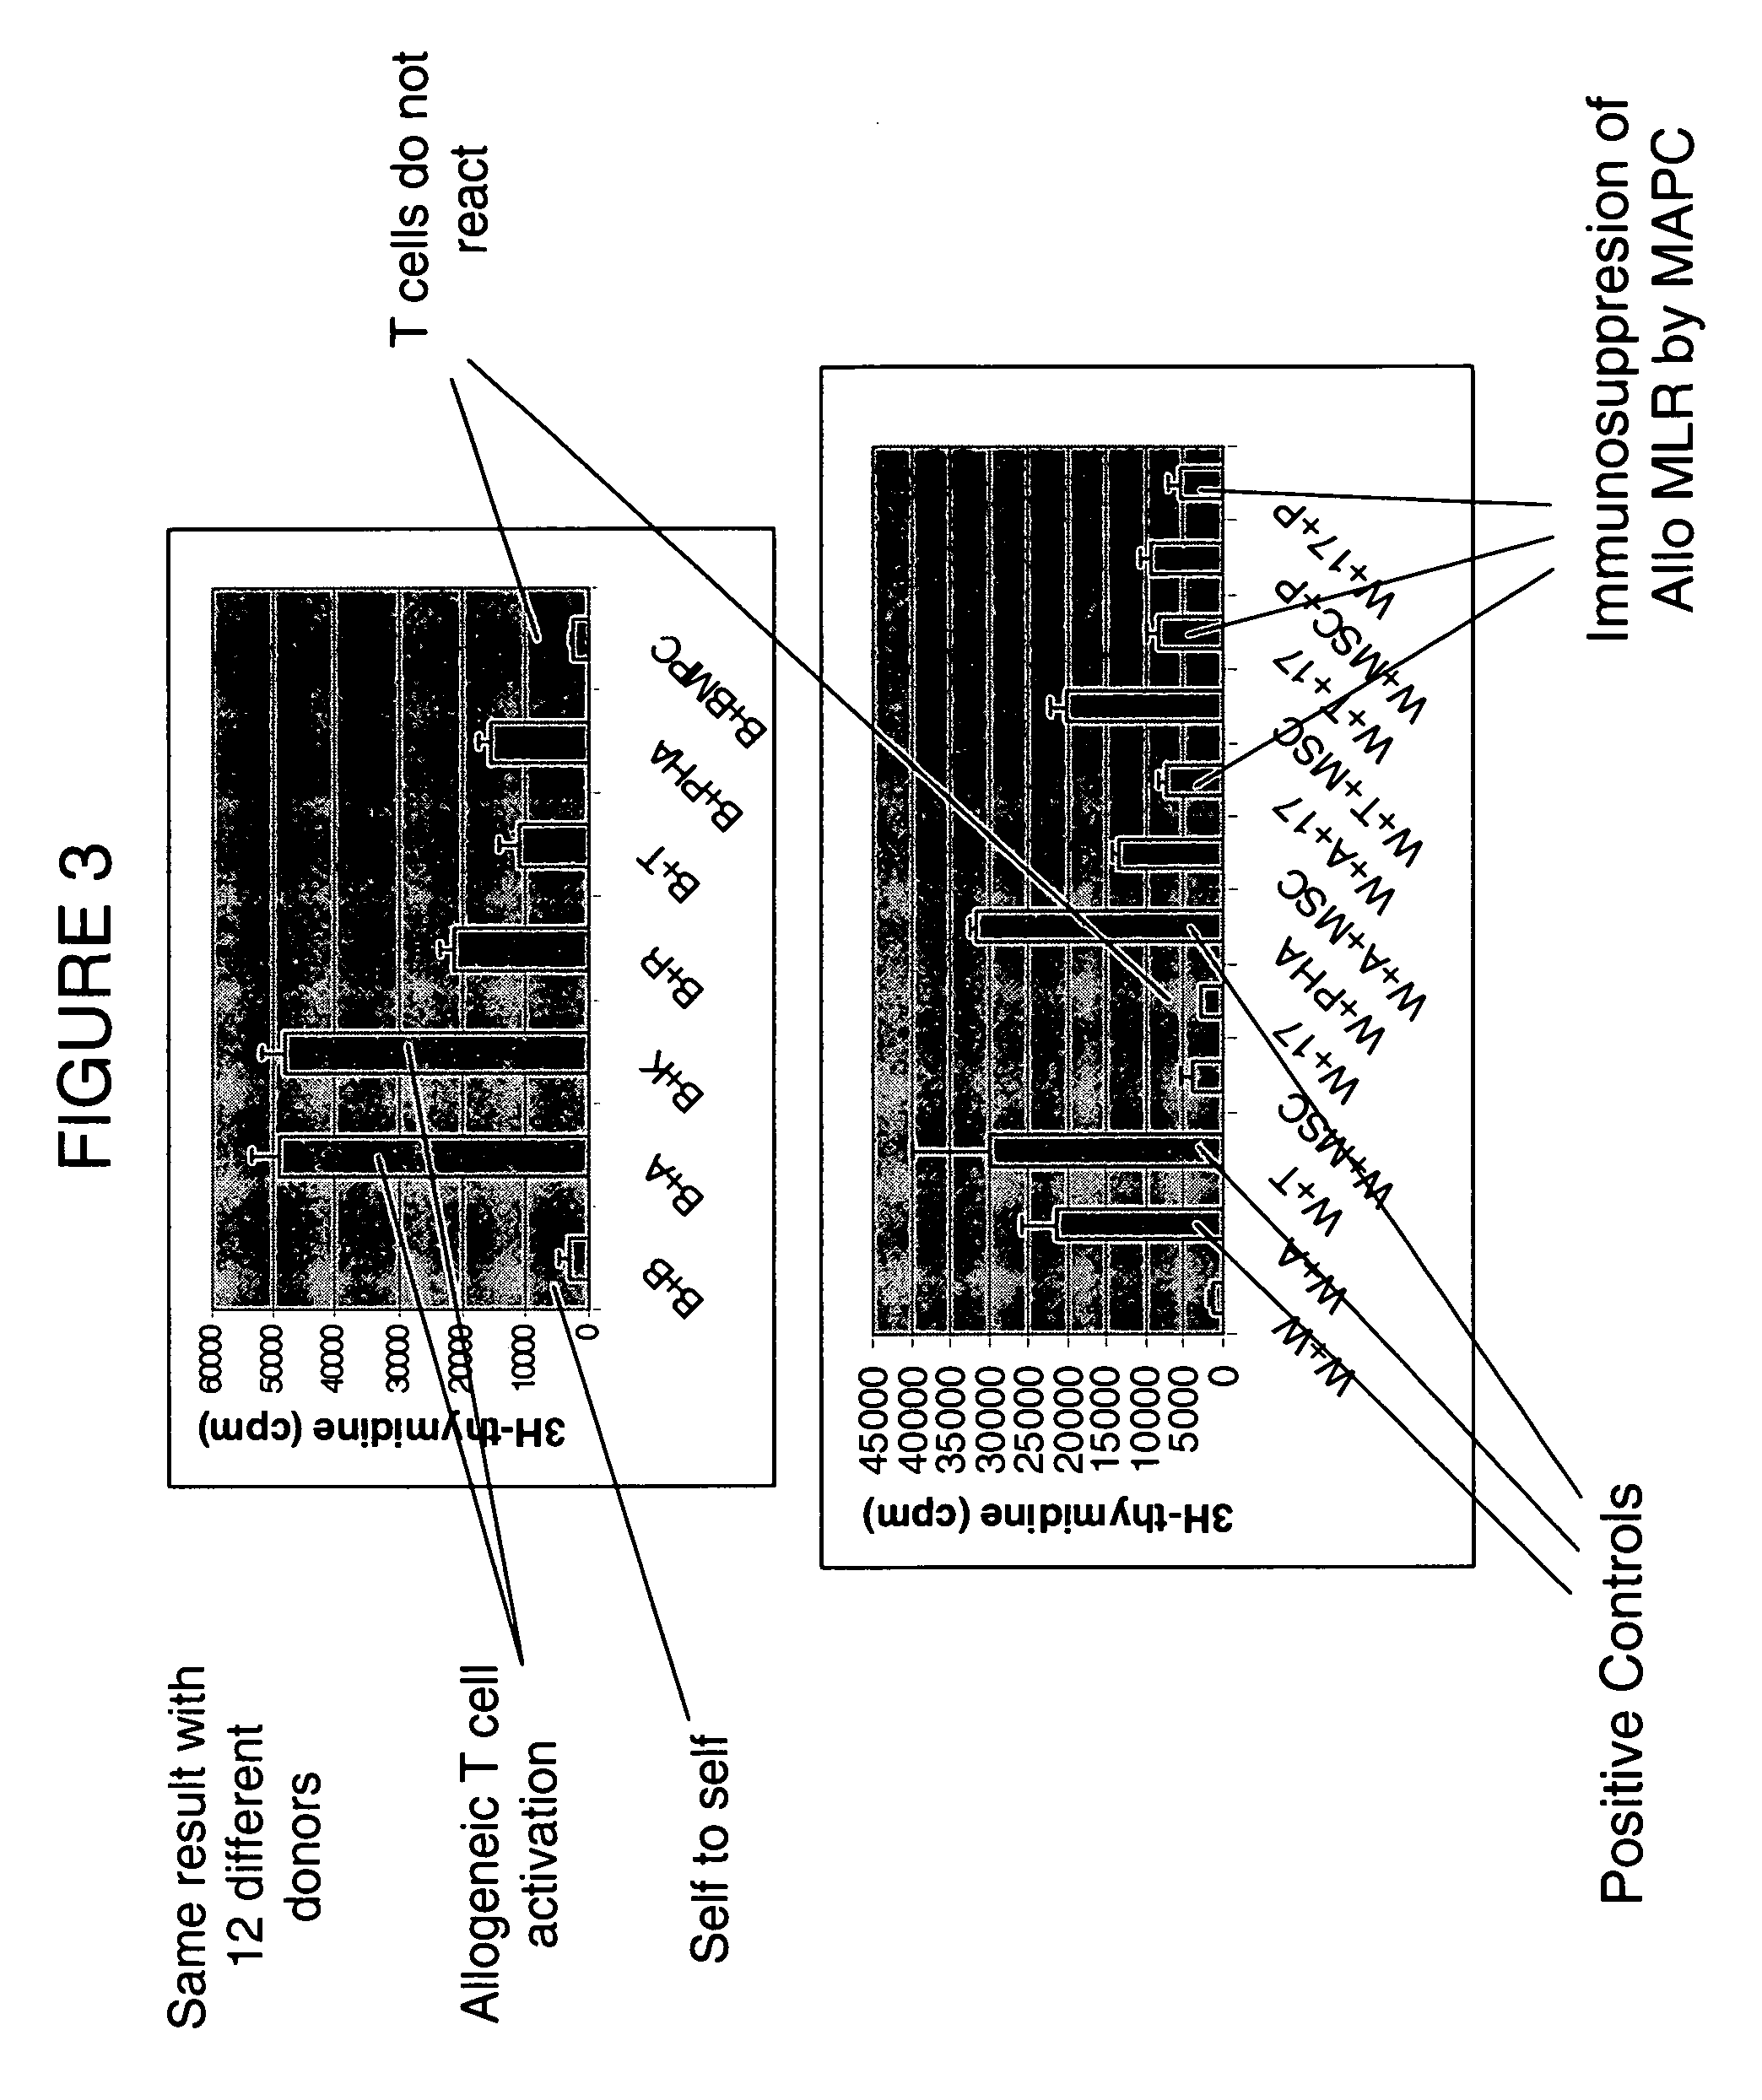 Immunomodulatory properties of multipotent adult progenitor cells and uses thereof